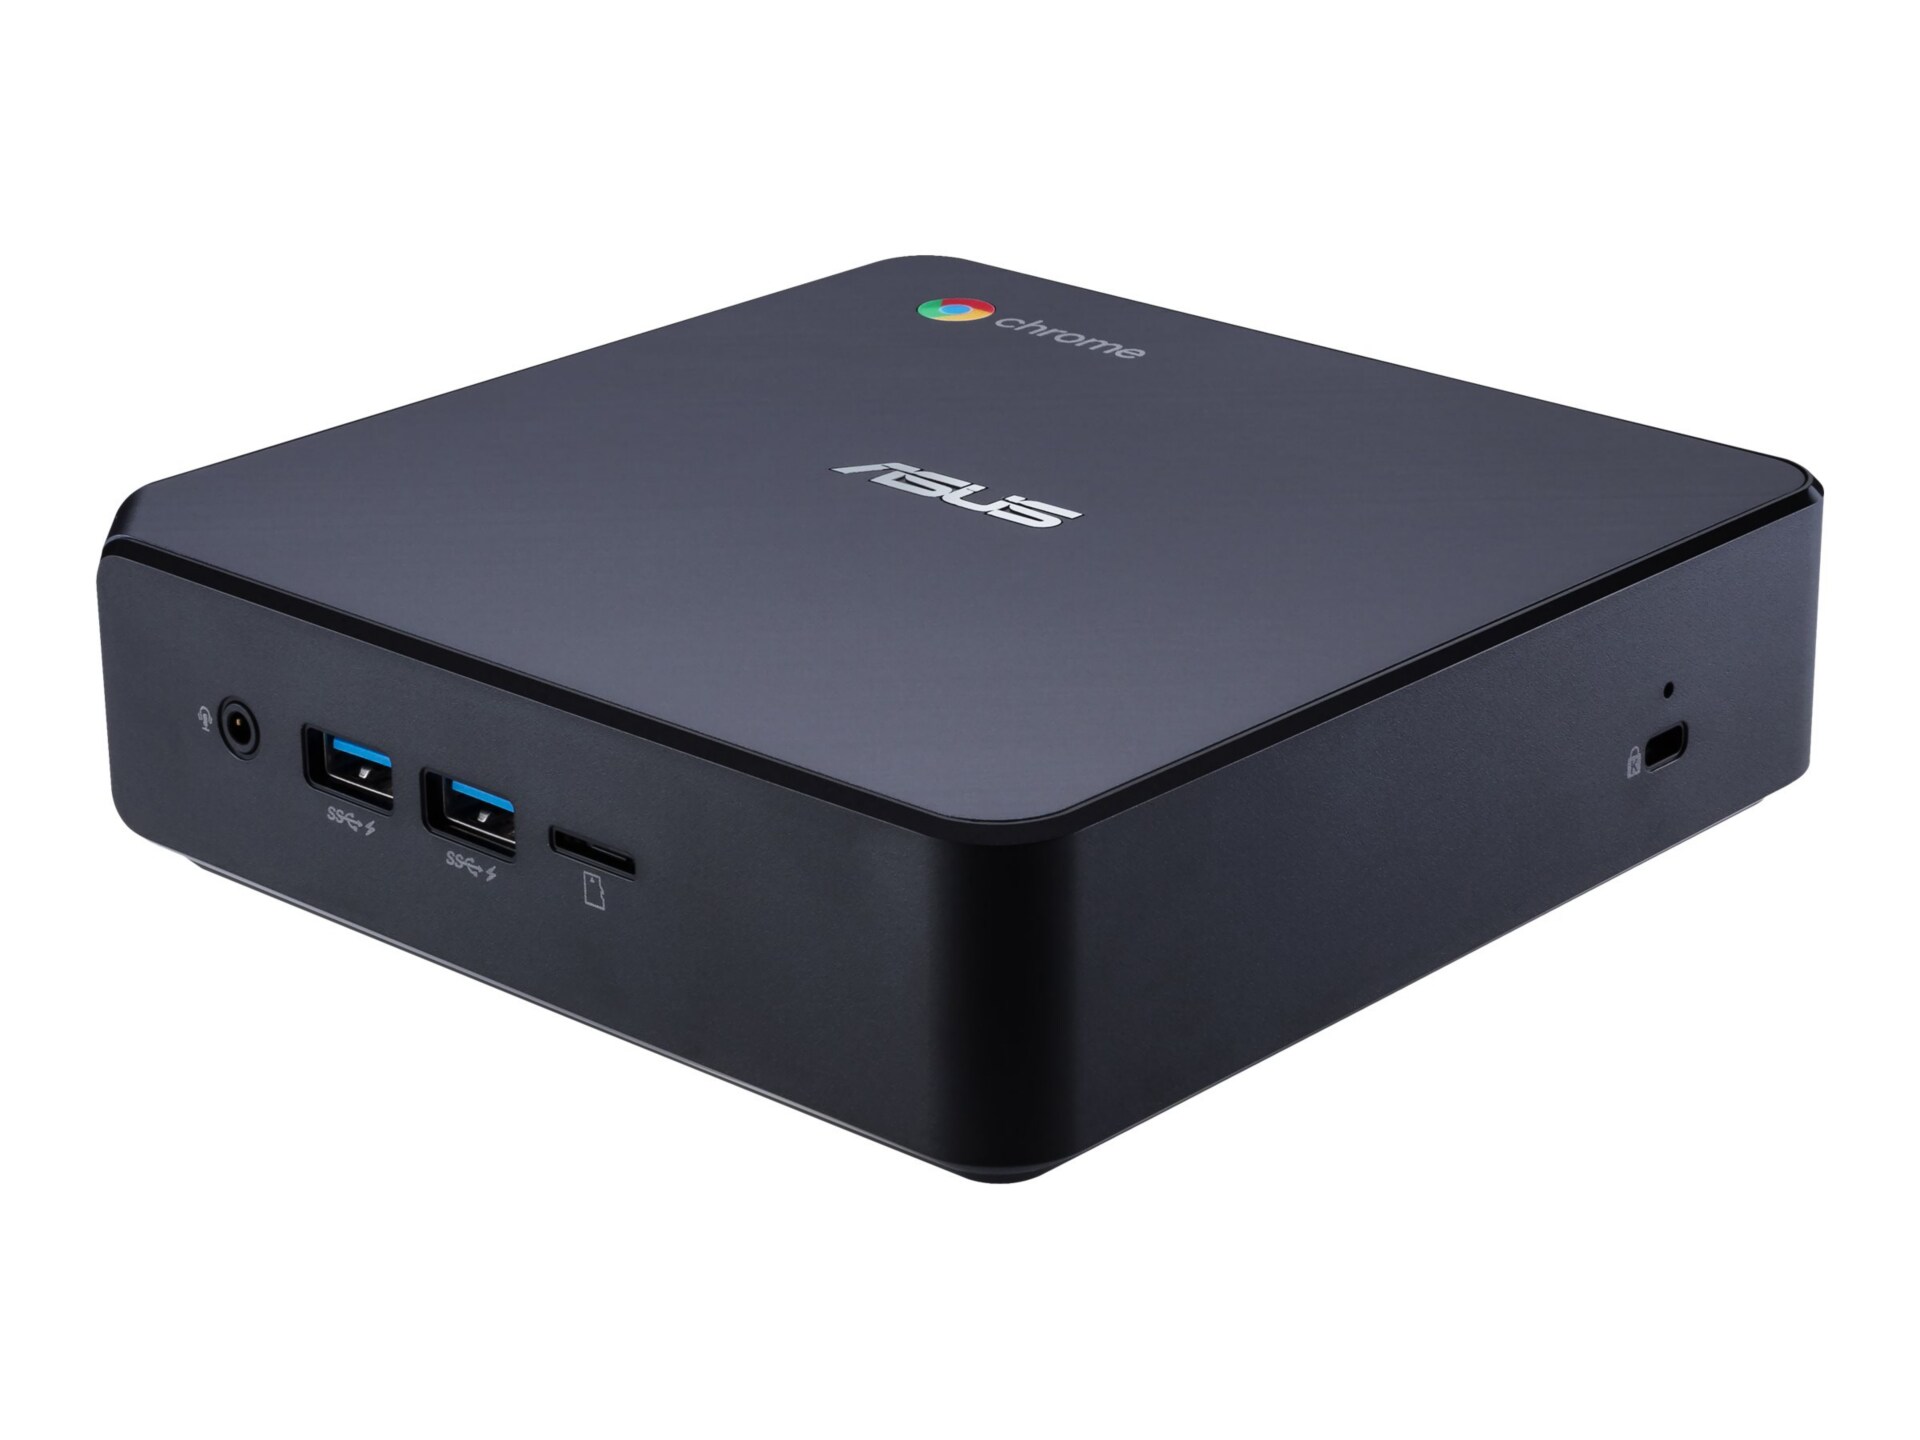 ASUS Chromeboxes